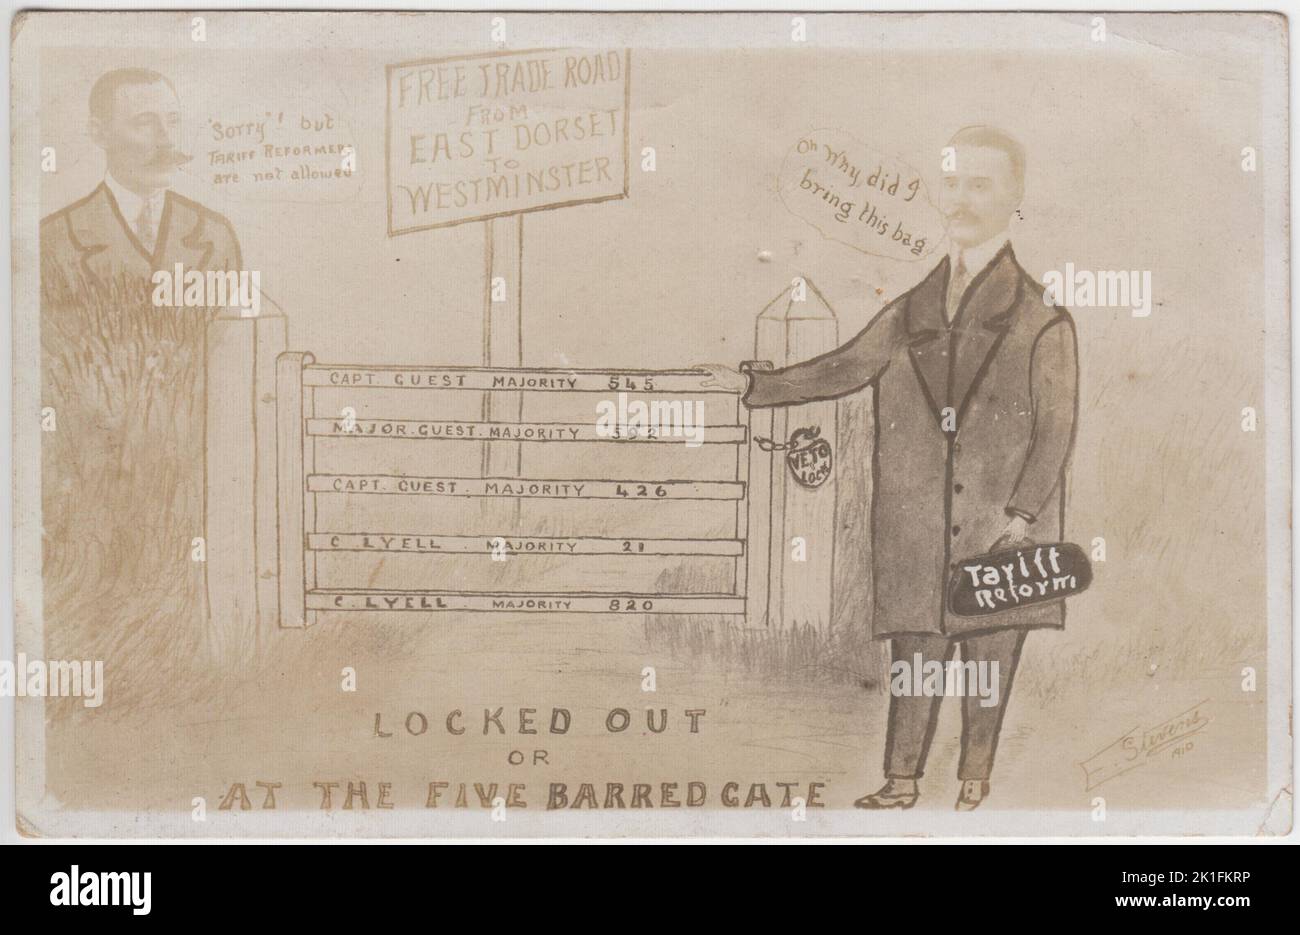 'Locked Out, or at the Five Barred Gate': cartoon about the December 1910 parliamentary election for East Dorset constituency. The cartoon shows Frederick Guest, successful Liberal Party candidate, standing behind a 5 bar gate on which the names & majorities of successful Liberal candidates (Charles Lyell, Frederick Guest & Henry Guest) between 1904-1910 have been written. Losing Conservative candidate, Maurice George Carr Glyn, has been locked out by a 'Veto lock' & is clutching a bag marked 'Tariff Reform'. A notice saying 'Free Trade Road from East Dorset to Westminster' is behind the gate Stock Photo